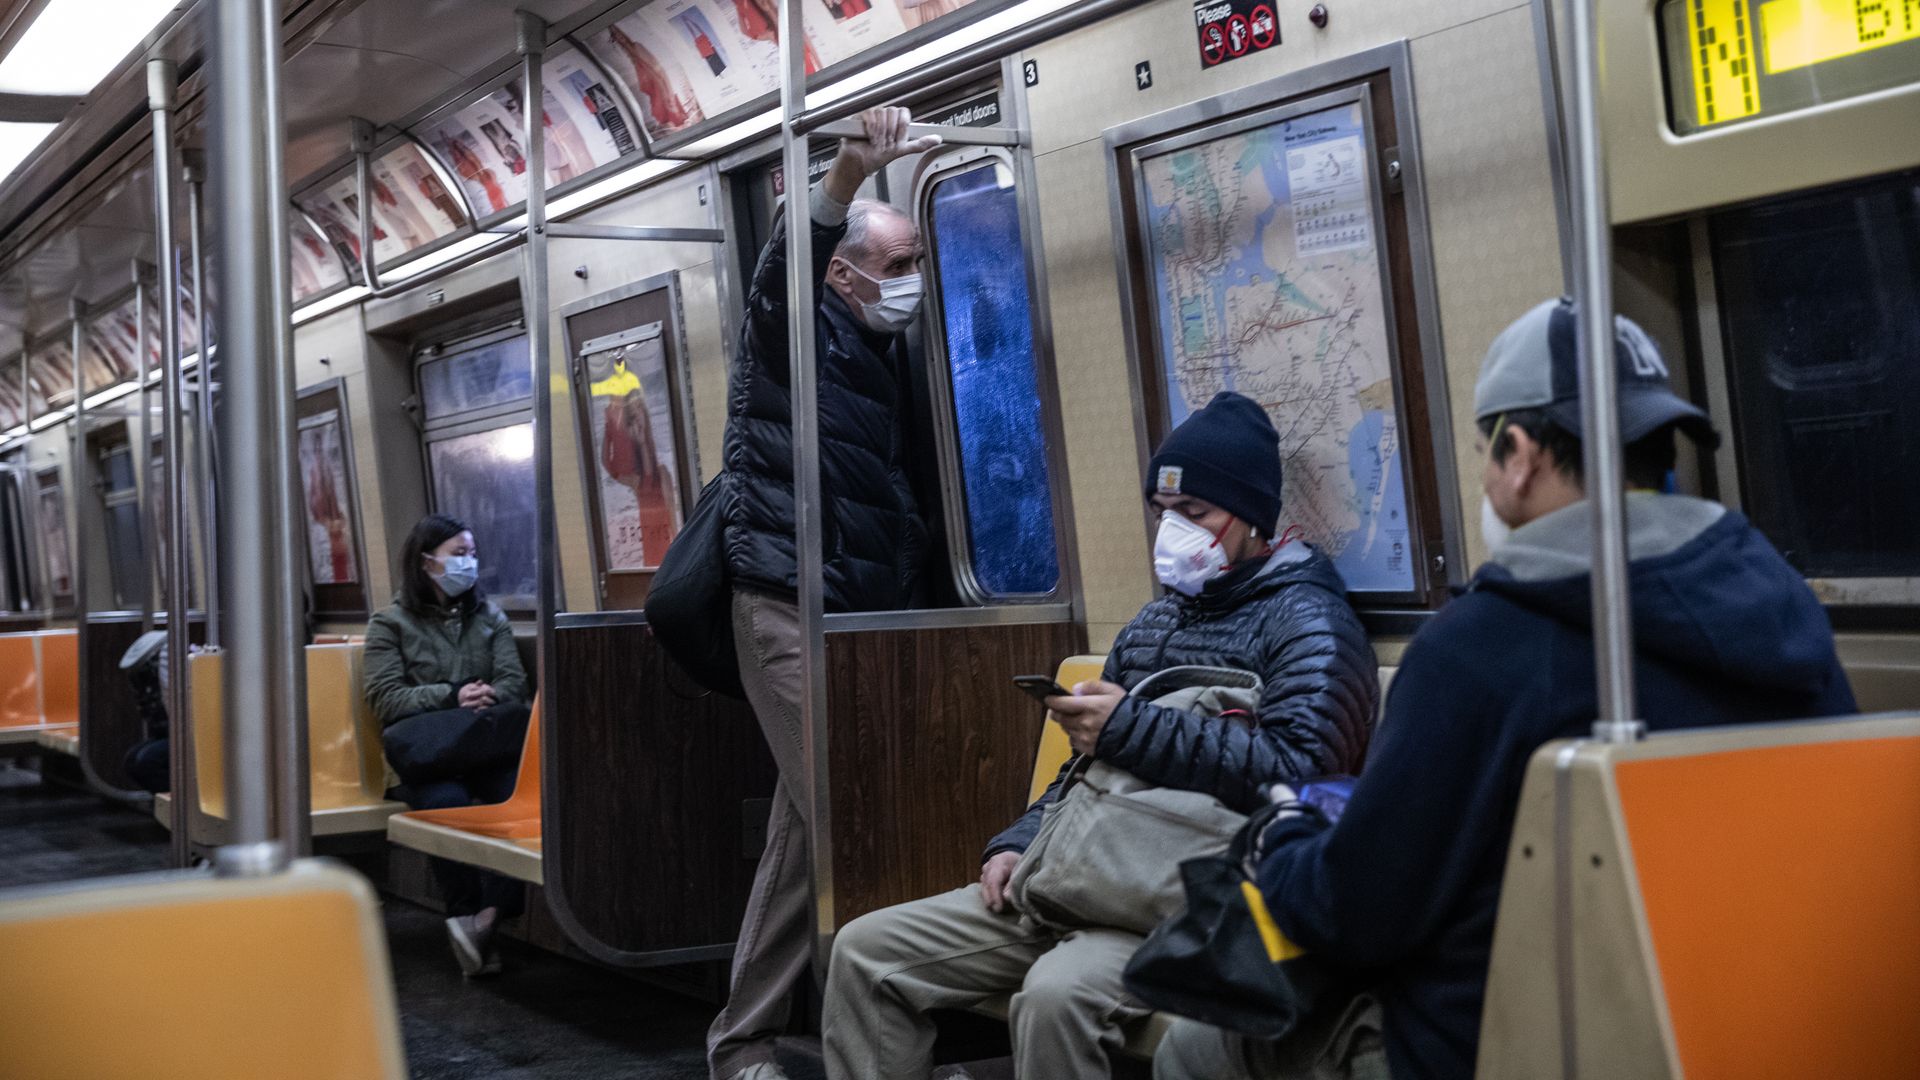 In this image, several people sit on a subway while wearing masks